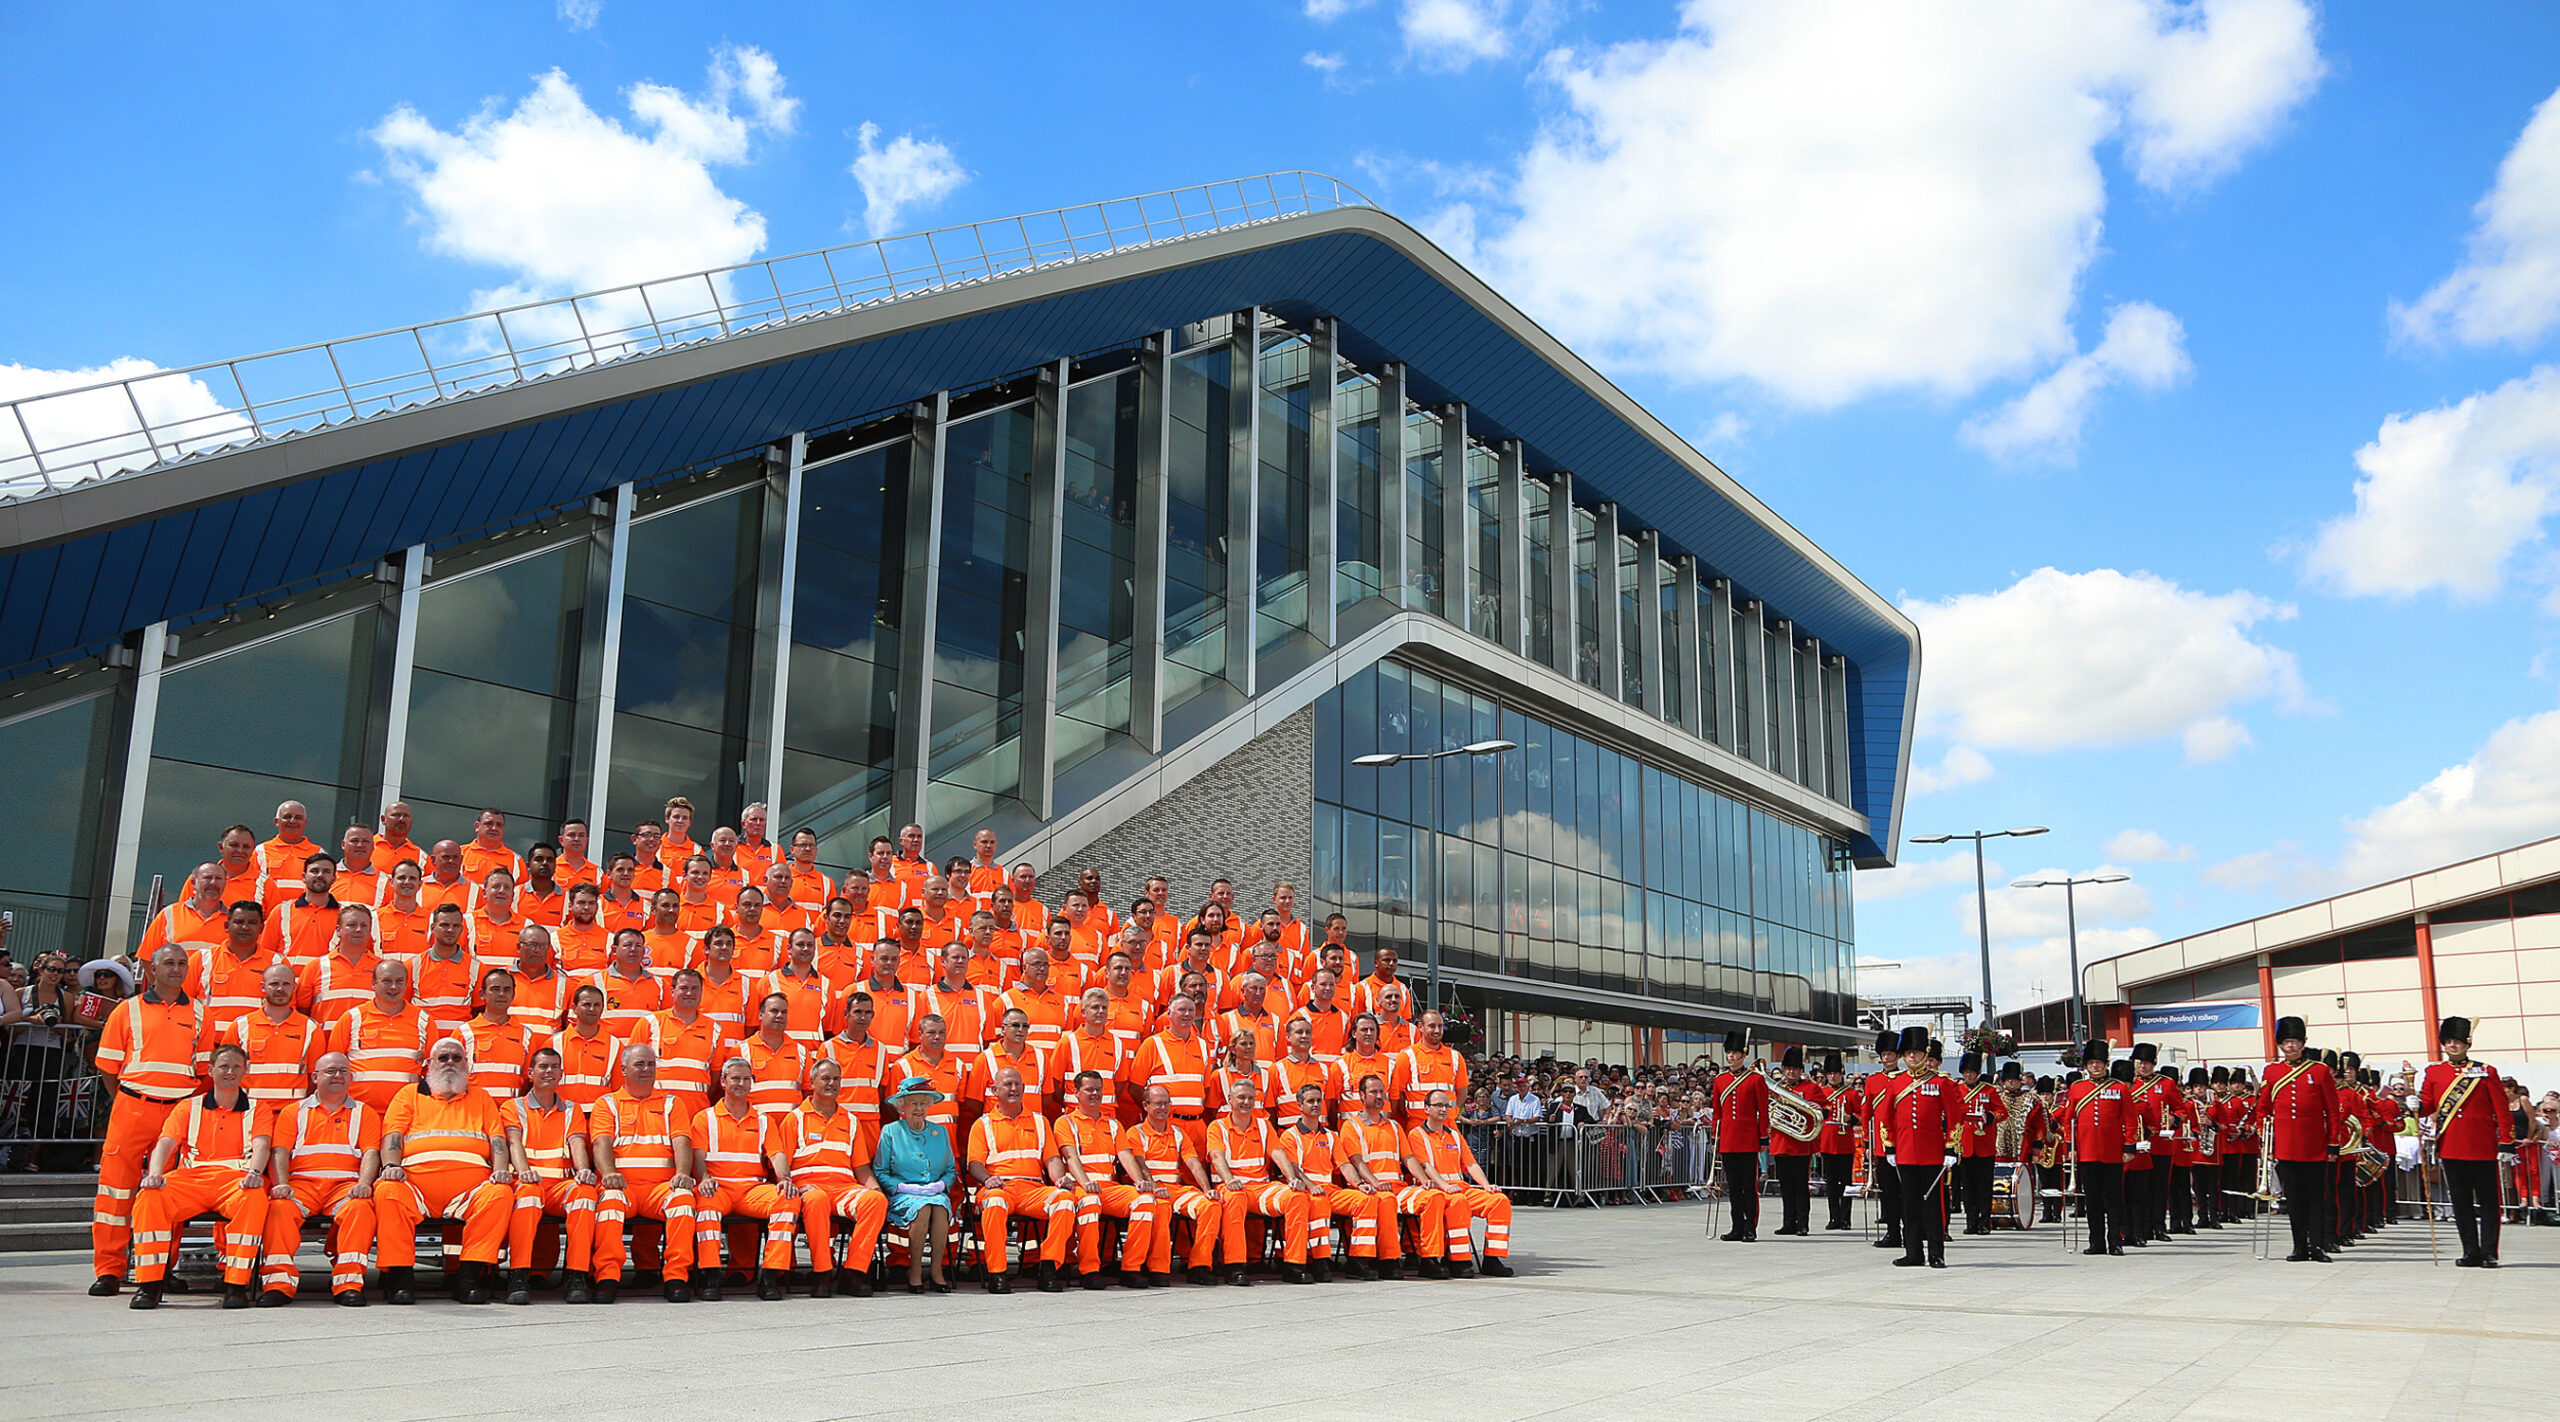 Her Majesty The Queen in special photograph with rail colleagues in front of Reading railway station.